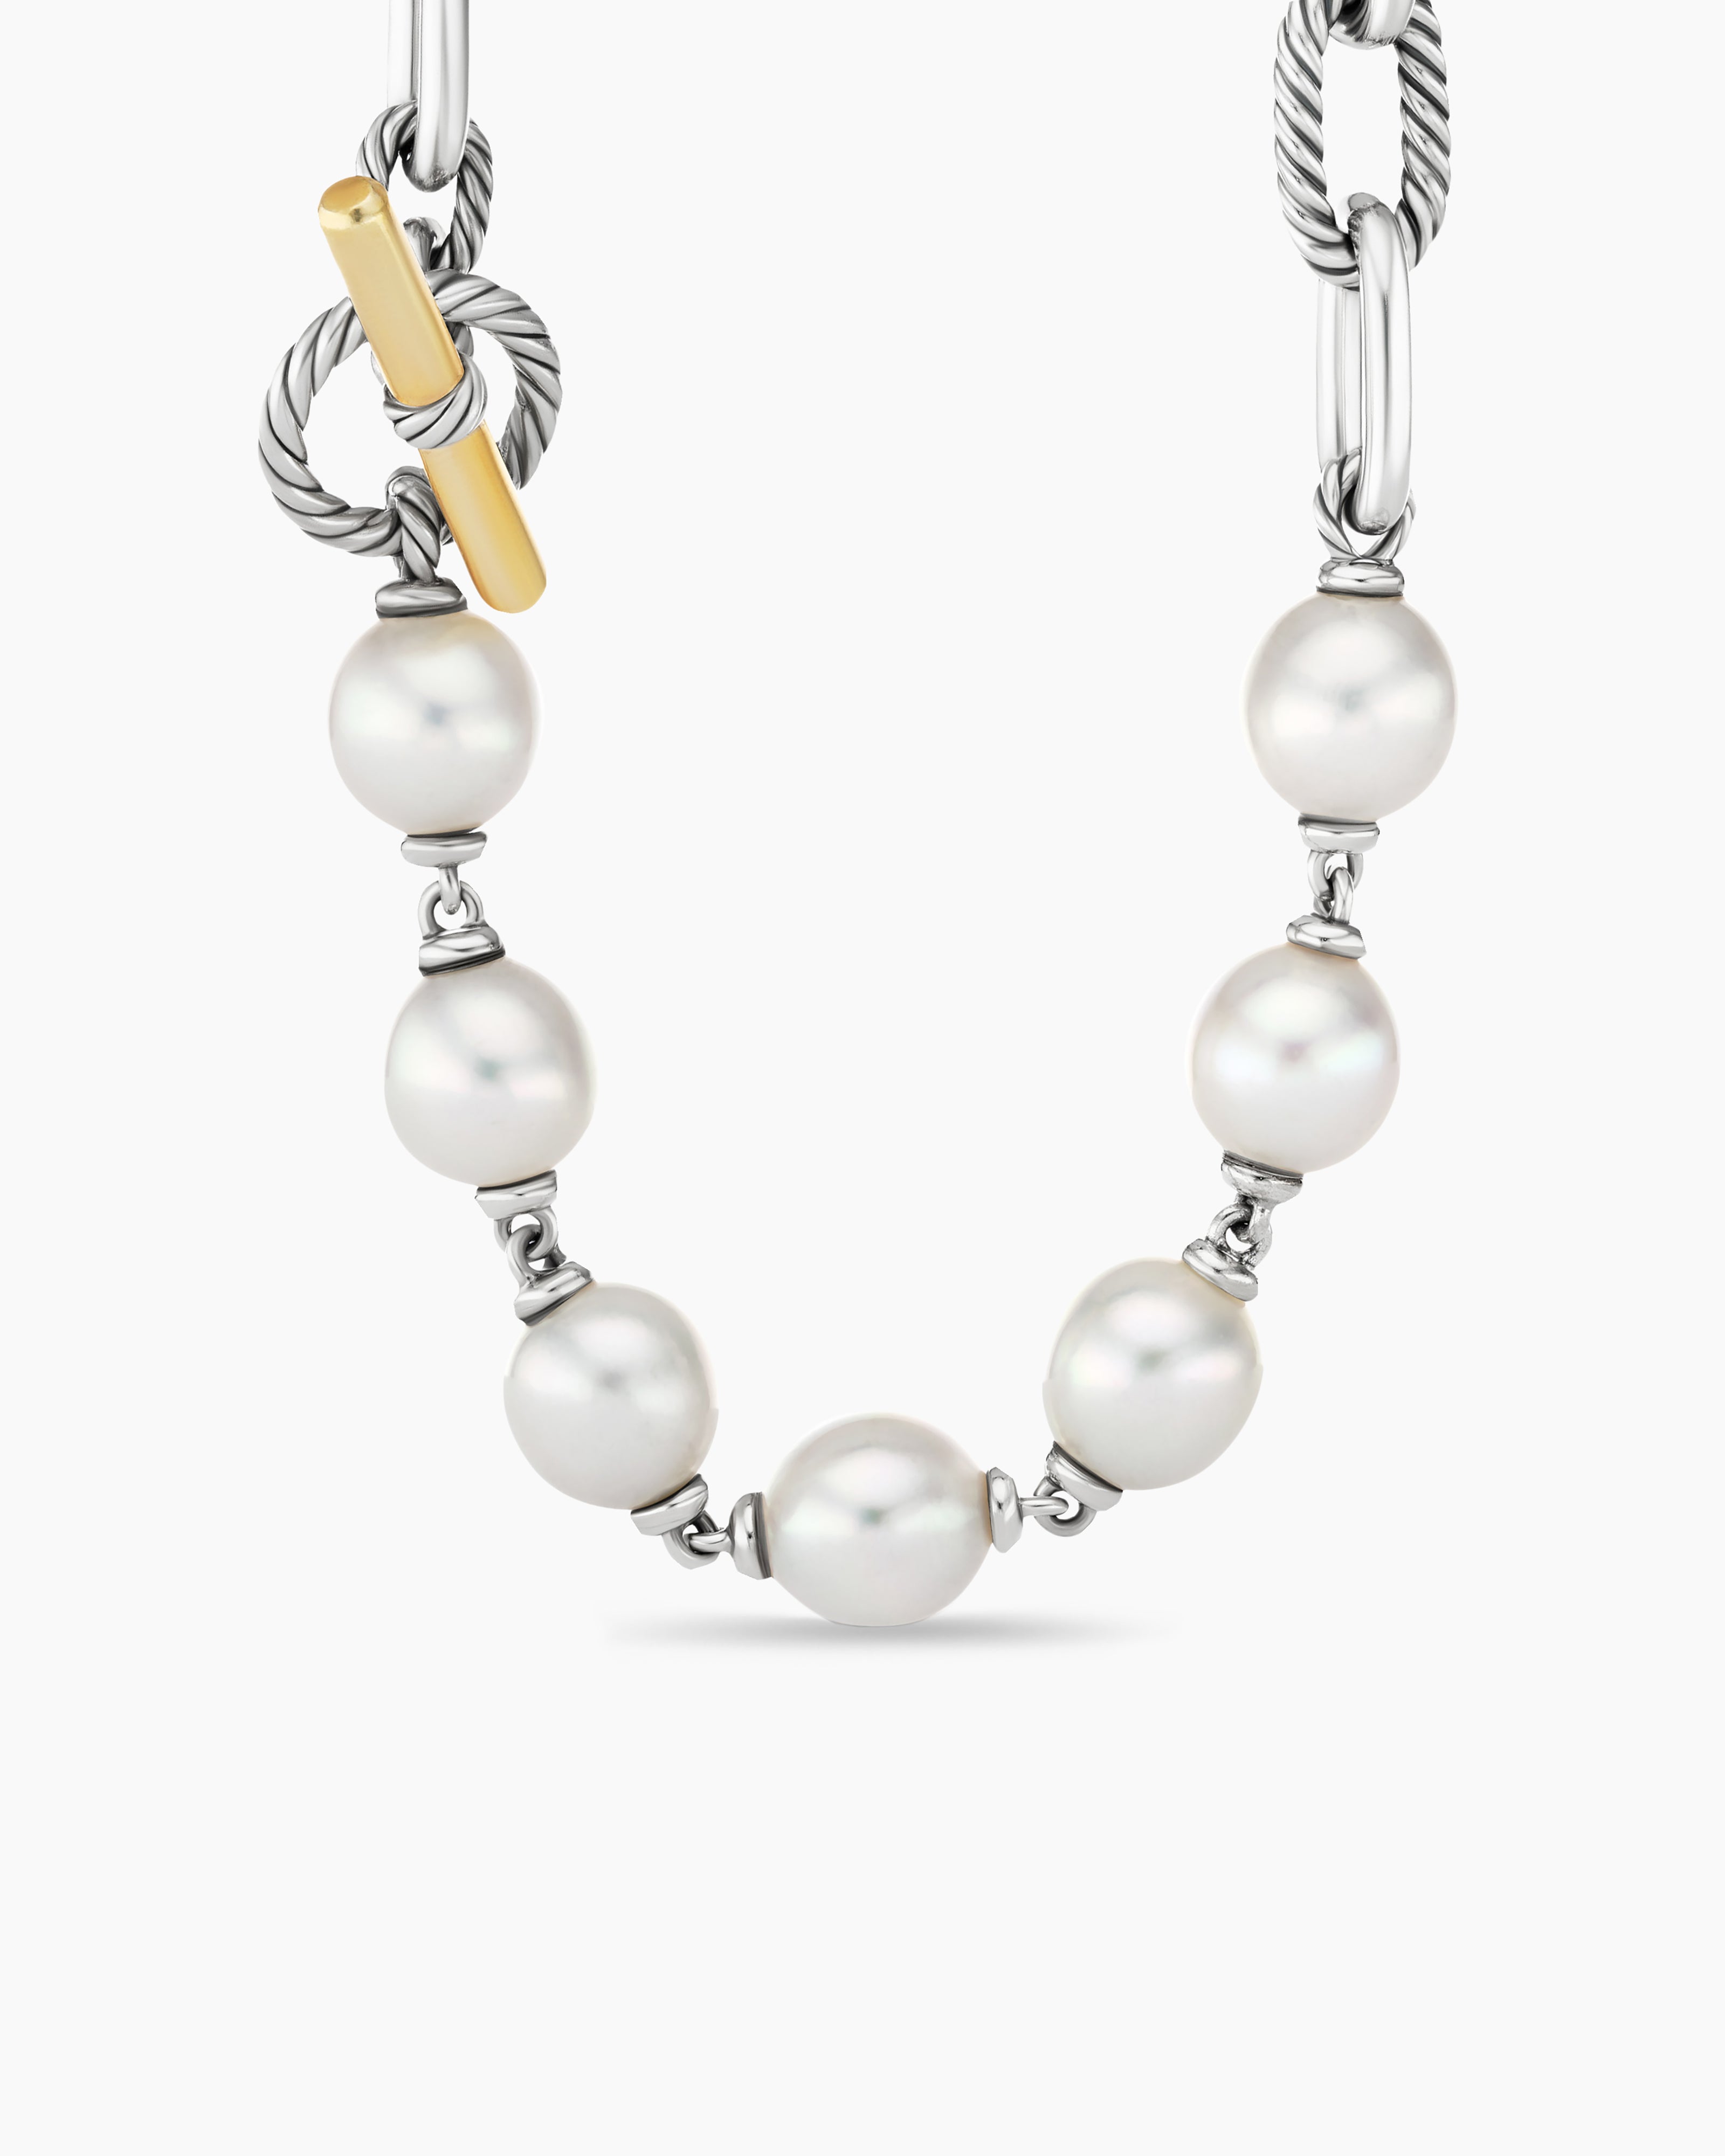 Return to Tiffany Wrap Necklace in Silver with Pearls and A Diamond, Small